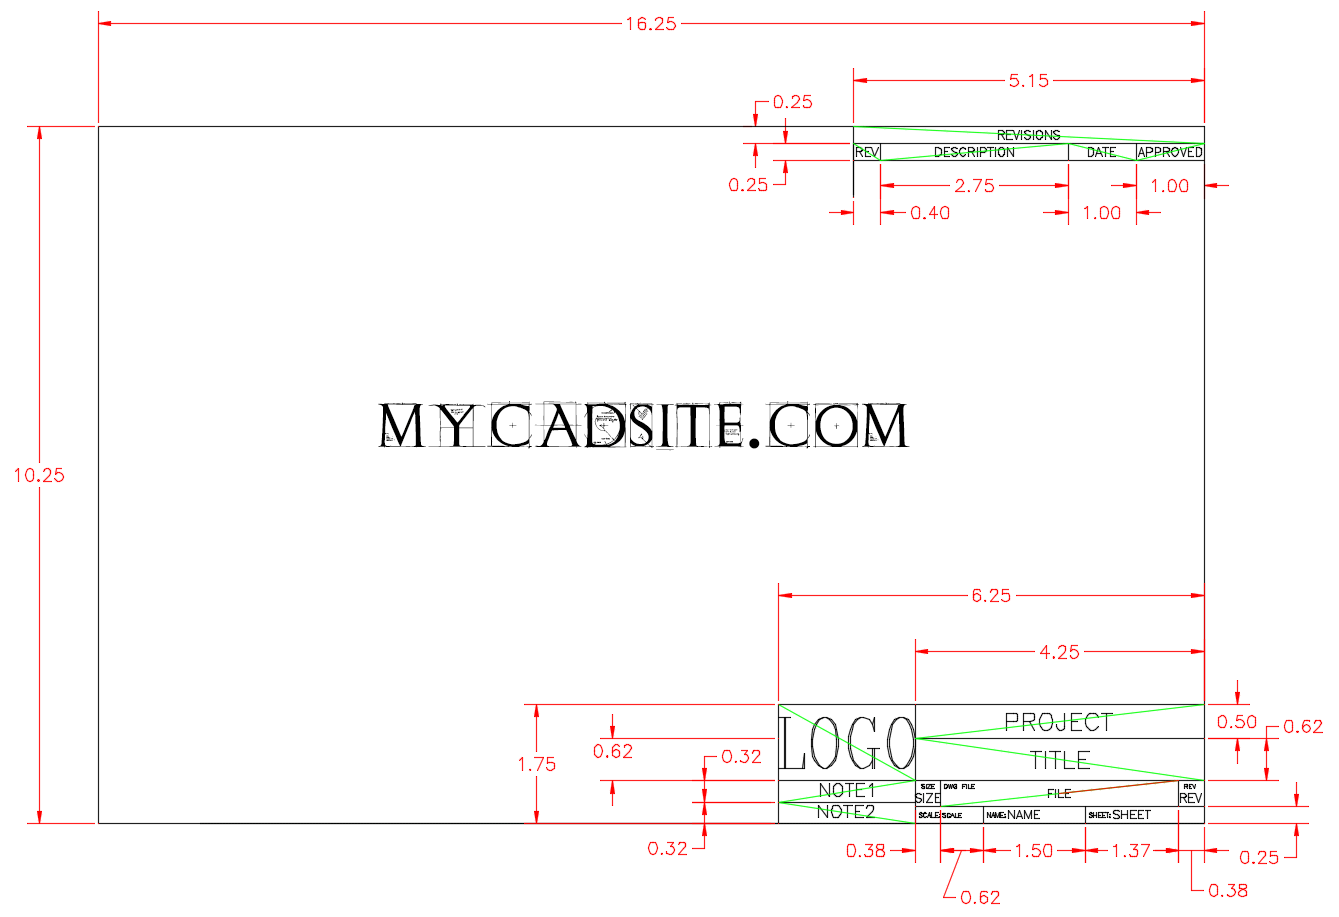 pvcirtual-autocad-drawing-template